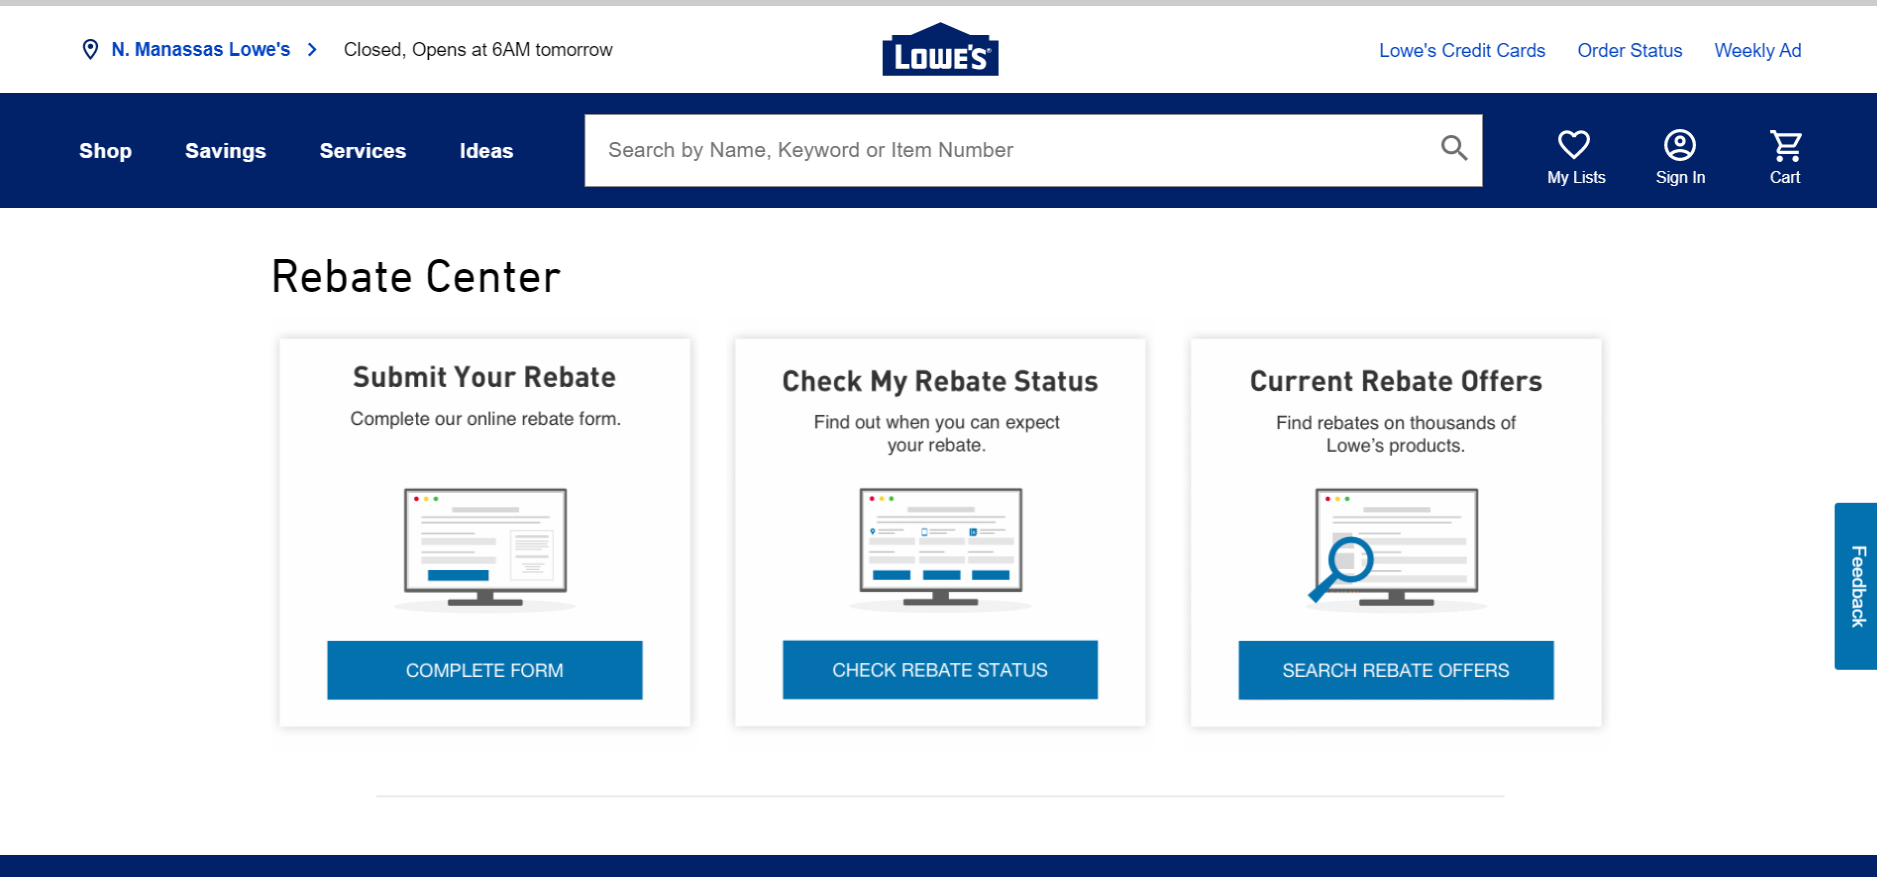 lowe-s-rebate-center-a-complete-guide-to-saving-money-lowes-rebates